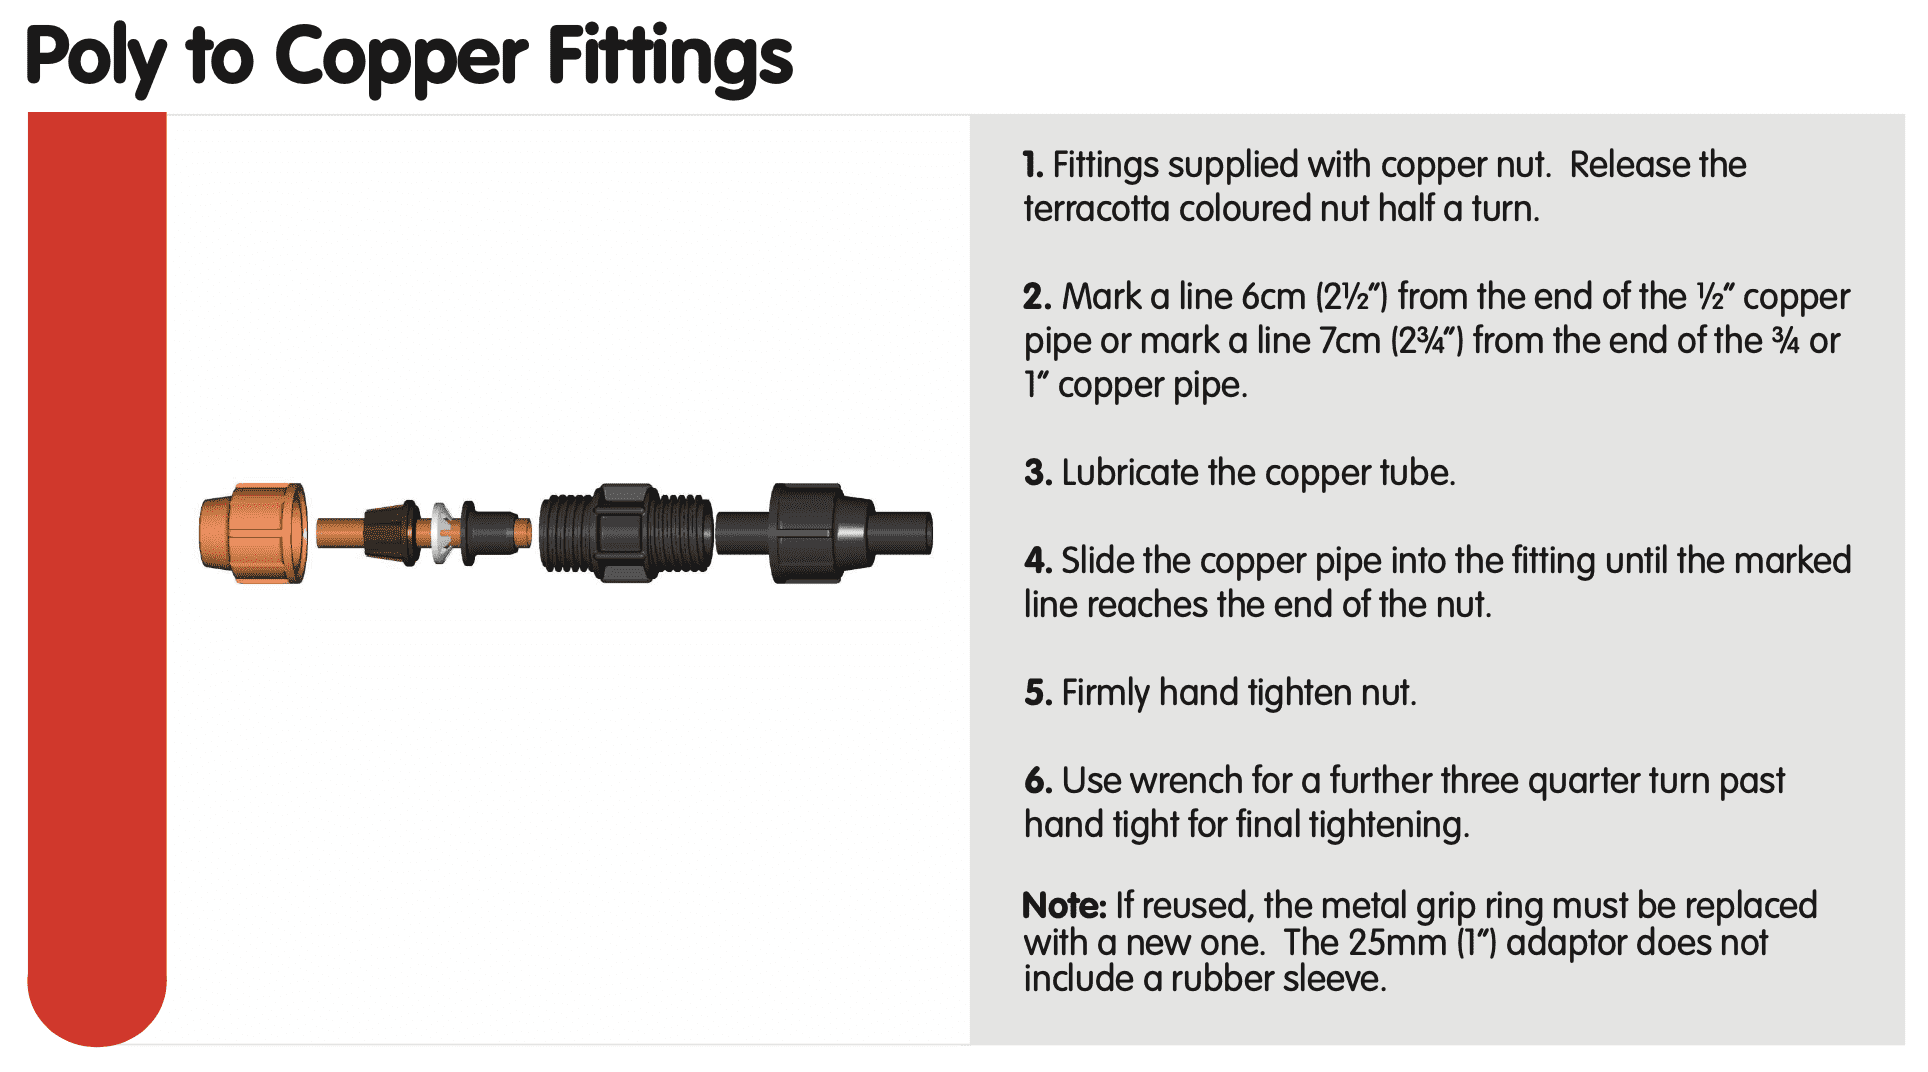 RELIABLE COMPRESSION FITTINGS